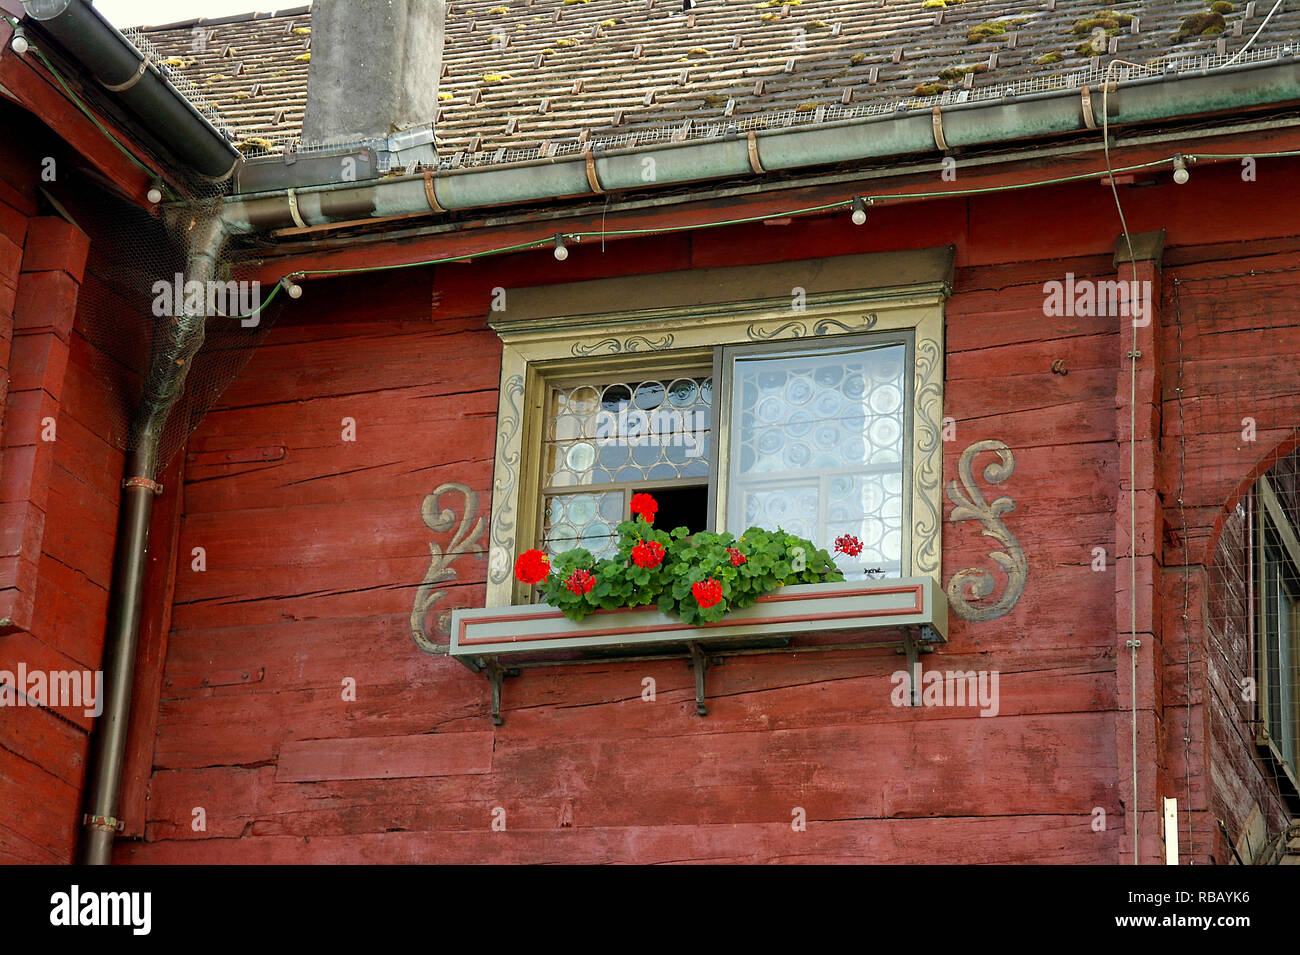 Austrian house window with ornate design and red geranium plants in window box Stock Photo